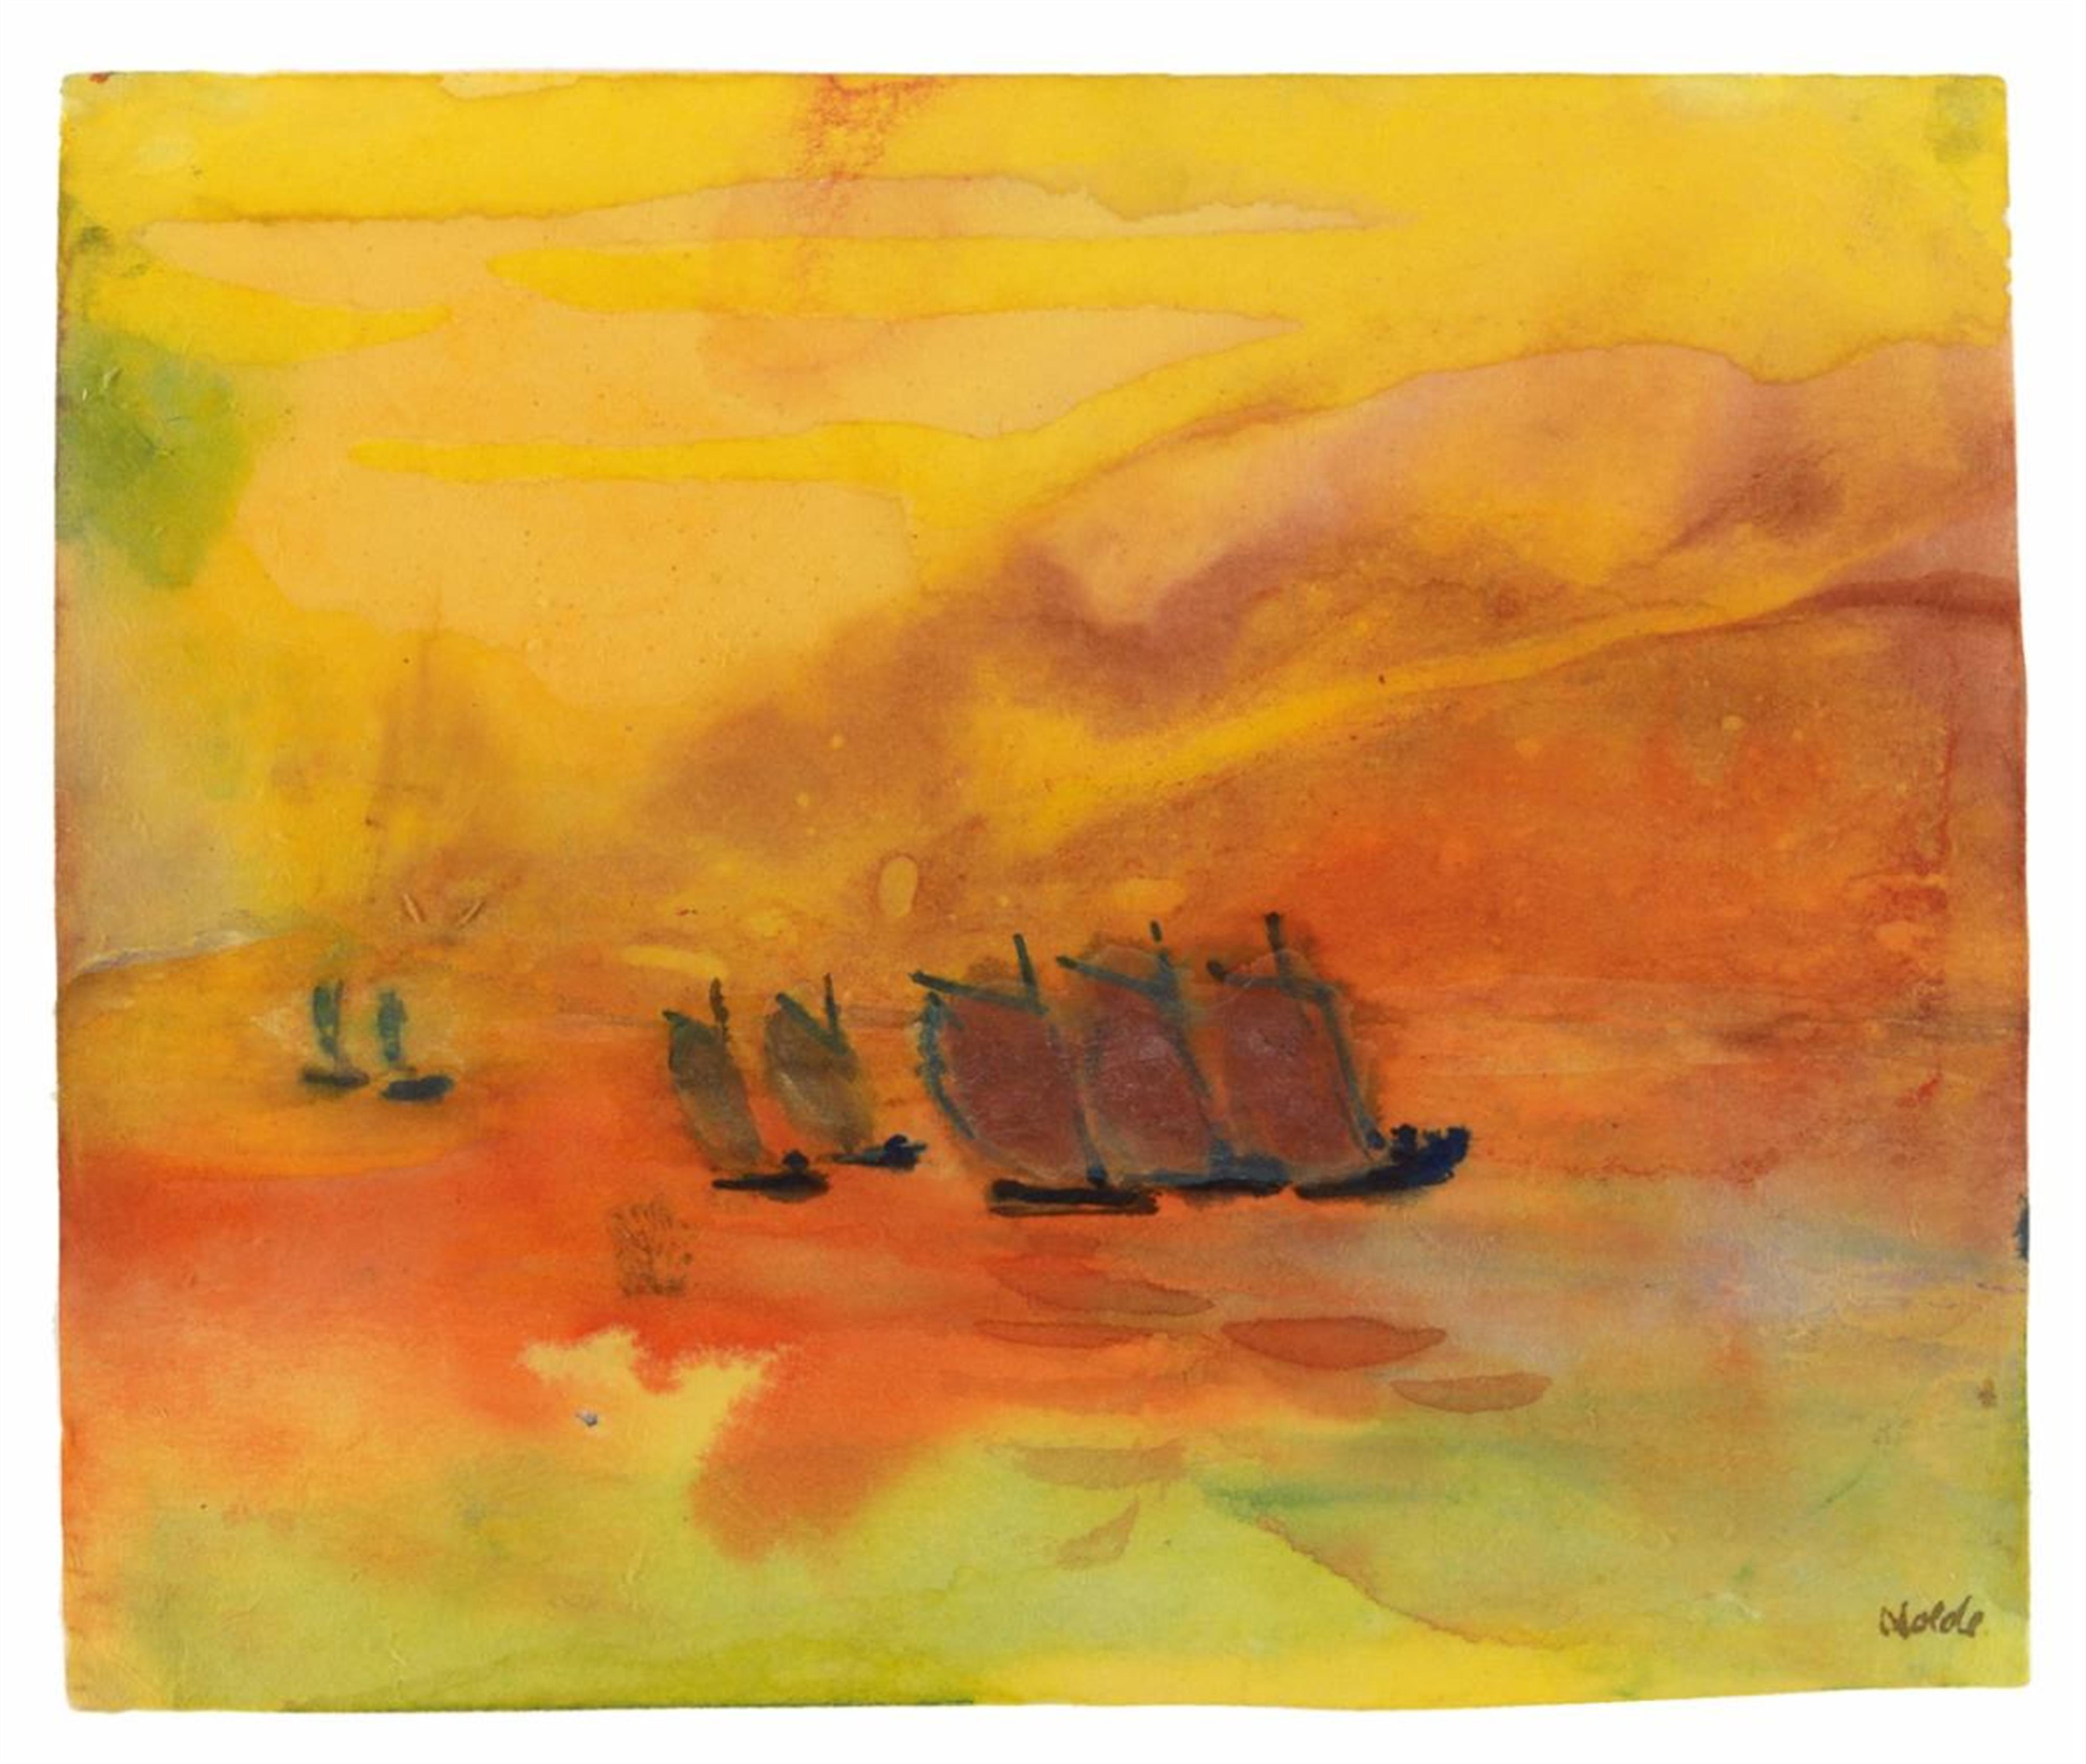 Emil Nolde - Segler im rot-gelben Abendmeer (Sailing Boats in Red and Yellow Evening Sea) - image-1